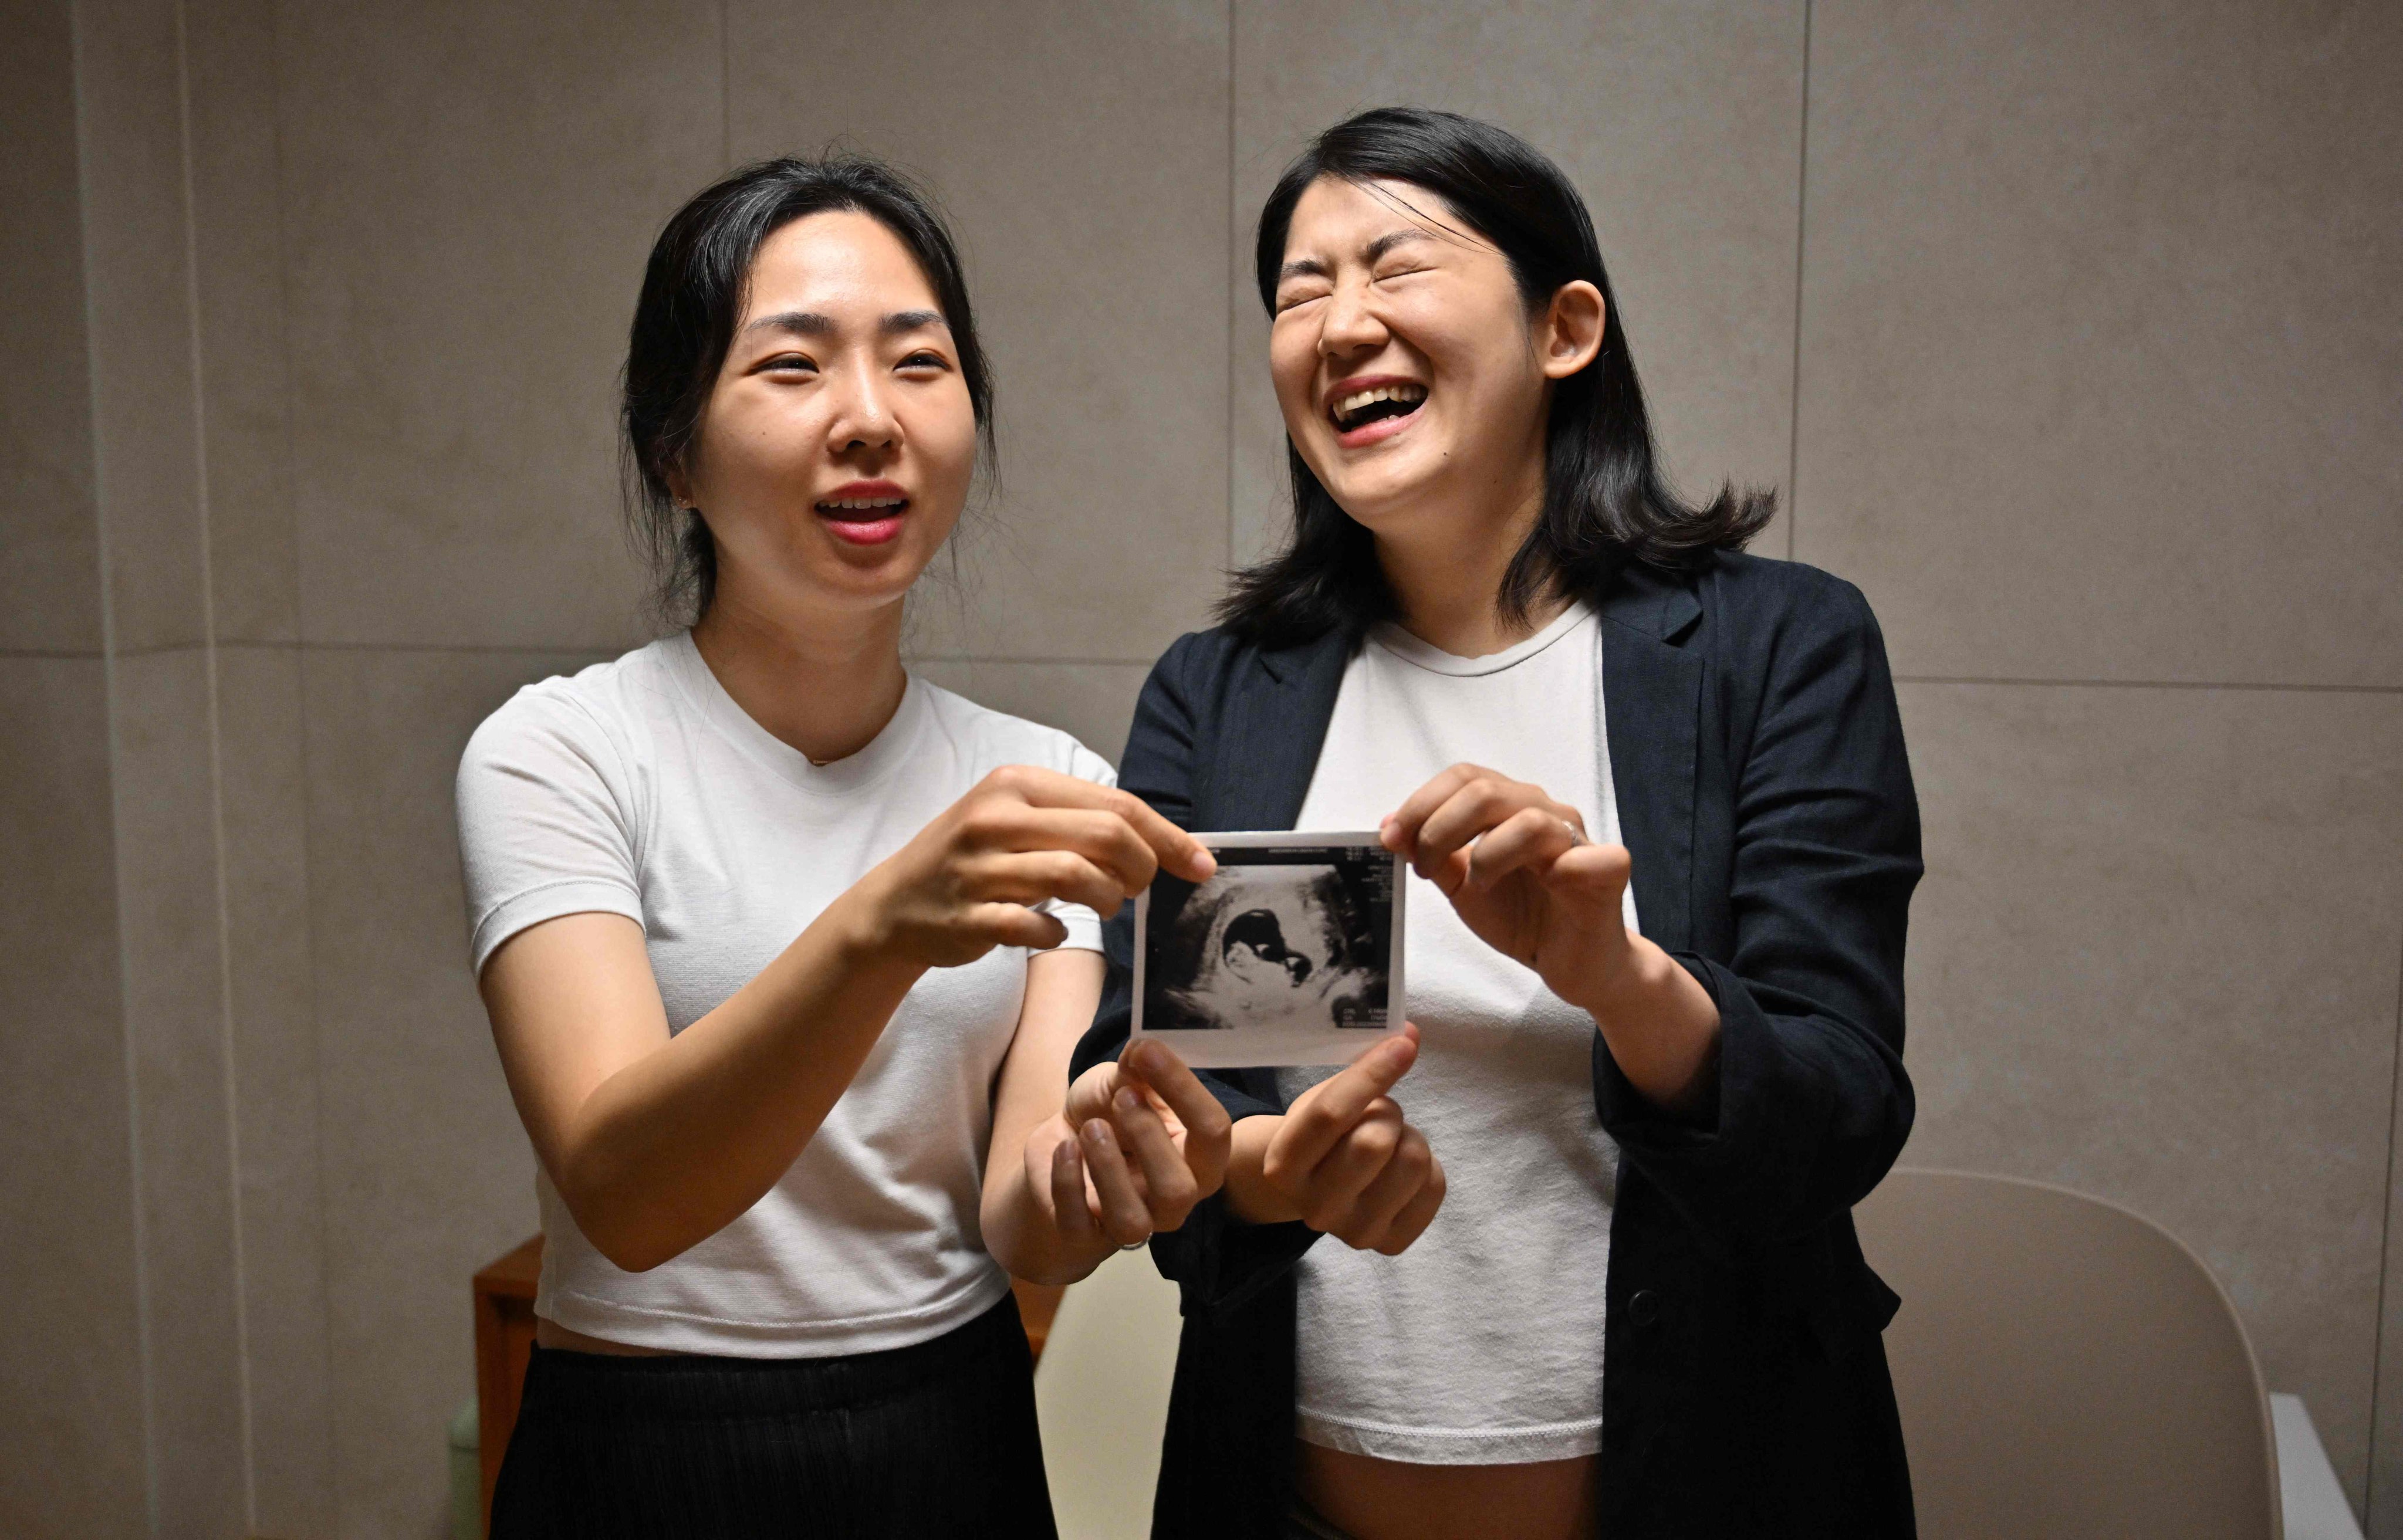 South Korean lesbian couple Kim Kyu-jin (right) and wife Kim Sae-yeon pose with a fetal ultrasound image. South Korea does not recognise same-sex unions. Photo: AFP